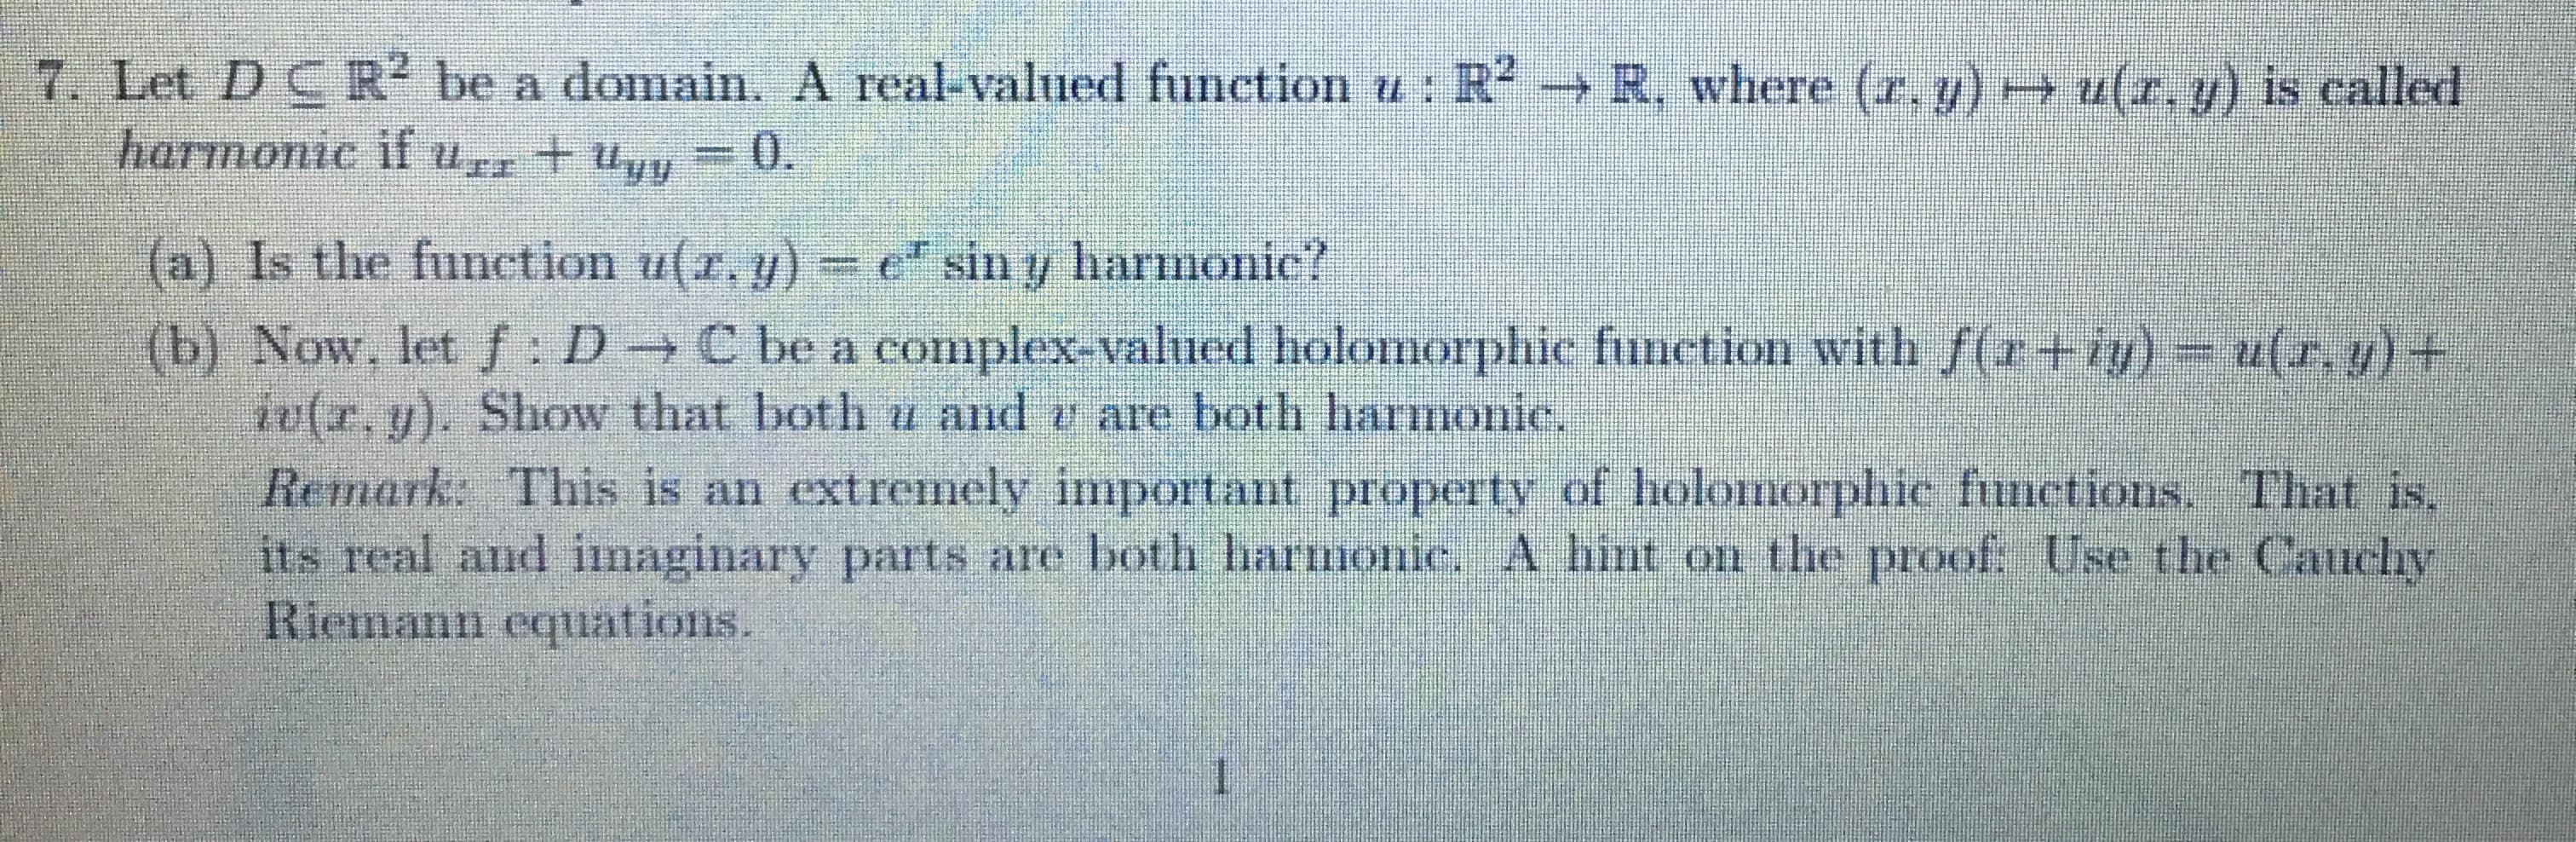 Let D C R? be a domain. A real-valued function u: R→R, where (r. y) u(r. y) is called
harmonic if ur+ Uyy= 0.
(a) Is the function u(r. y)
= c" sin y harmonic?
